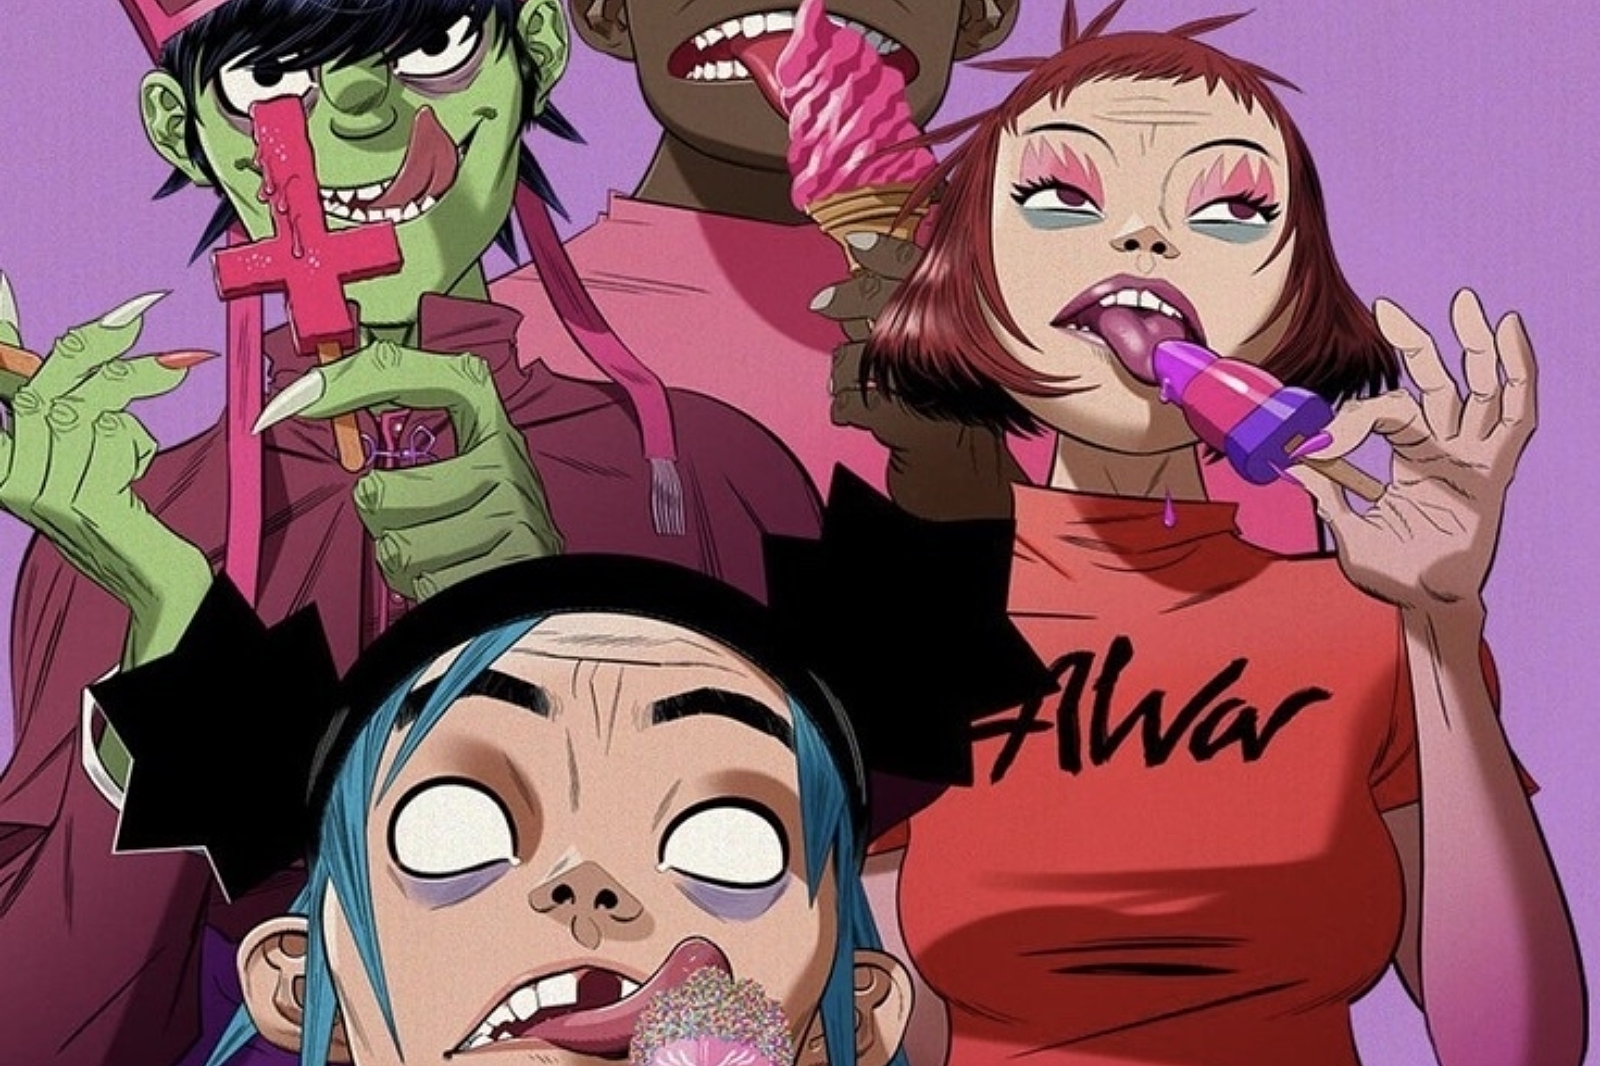 Gorillaz team up with Tame Impala for 'New Gold'